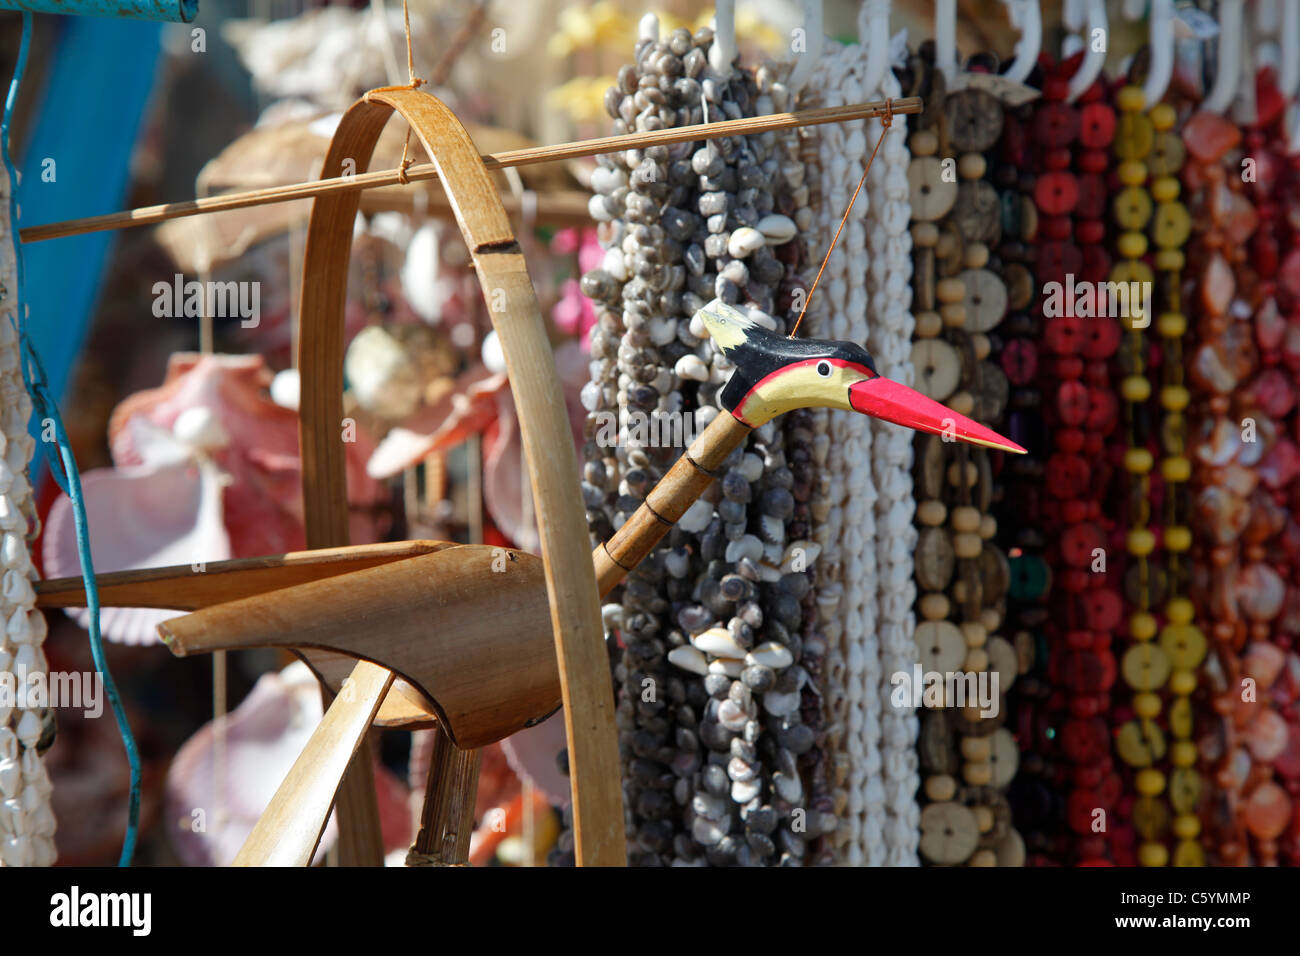 Some handcrafted souvenirs at a stand with a crane bird shaped decoration in the foreground Stock Photo